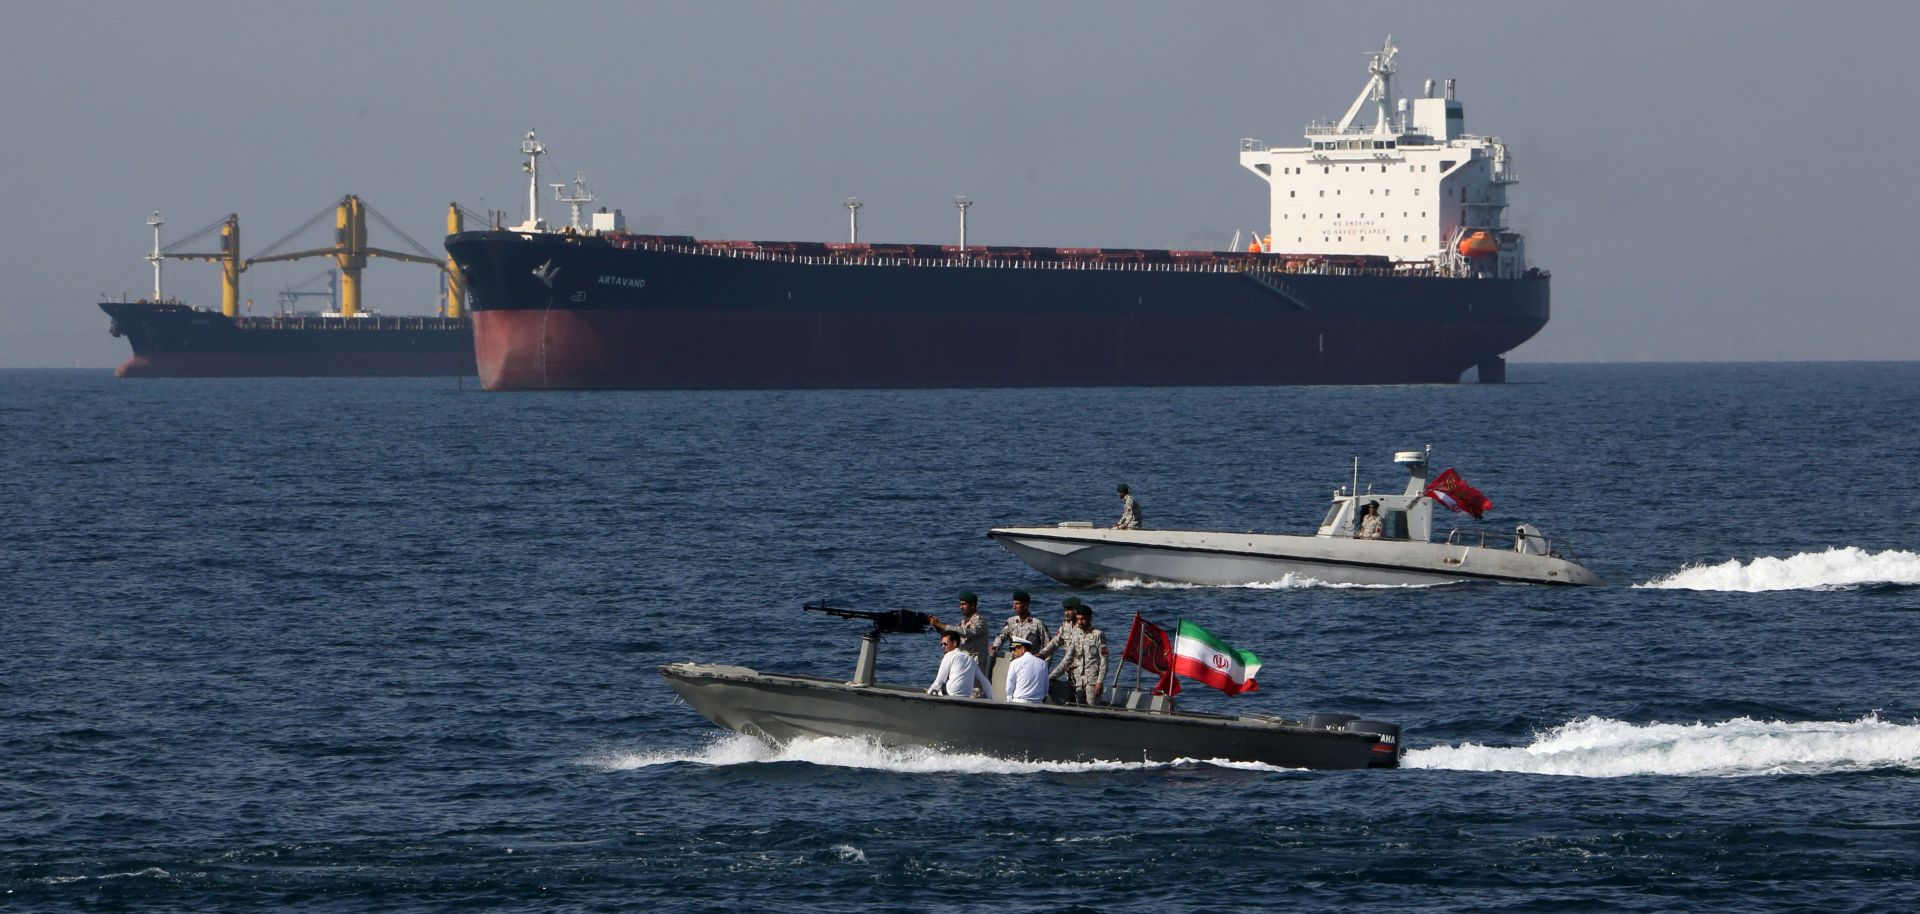 An armed Iranian speedboat in the Strait of Hormuz on April 30, 2019.